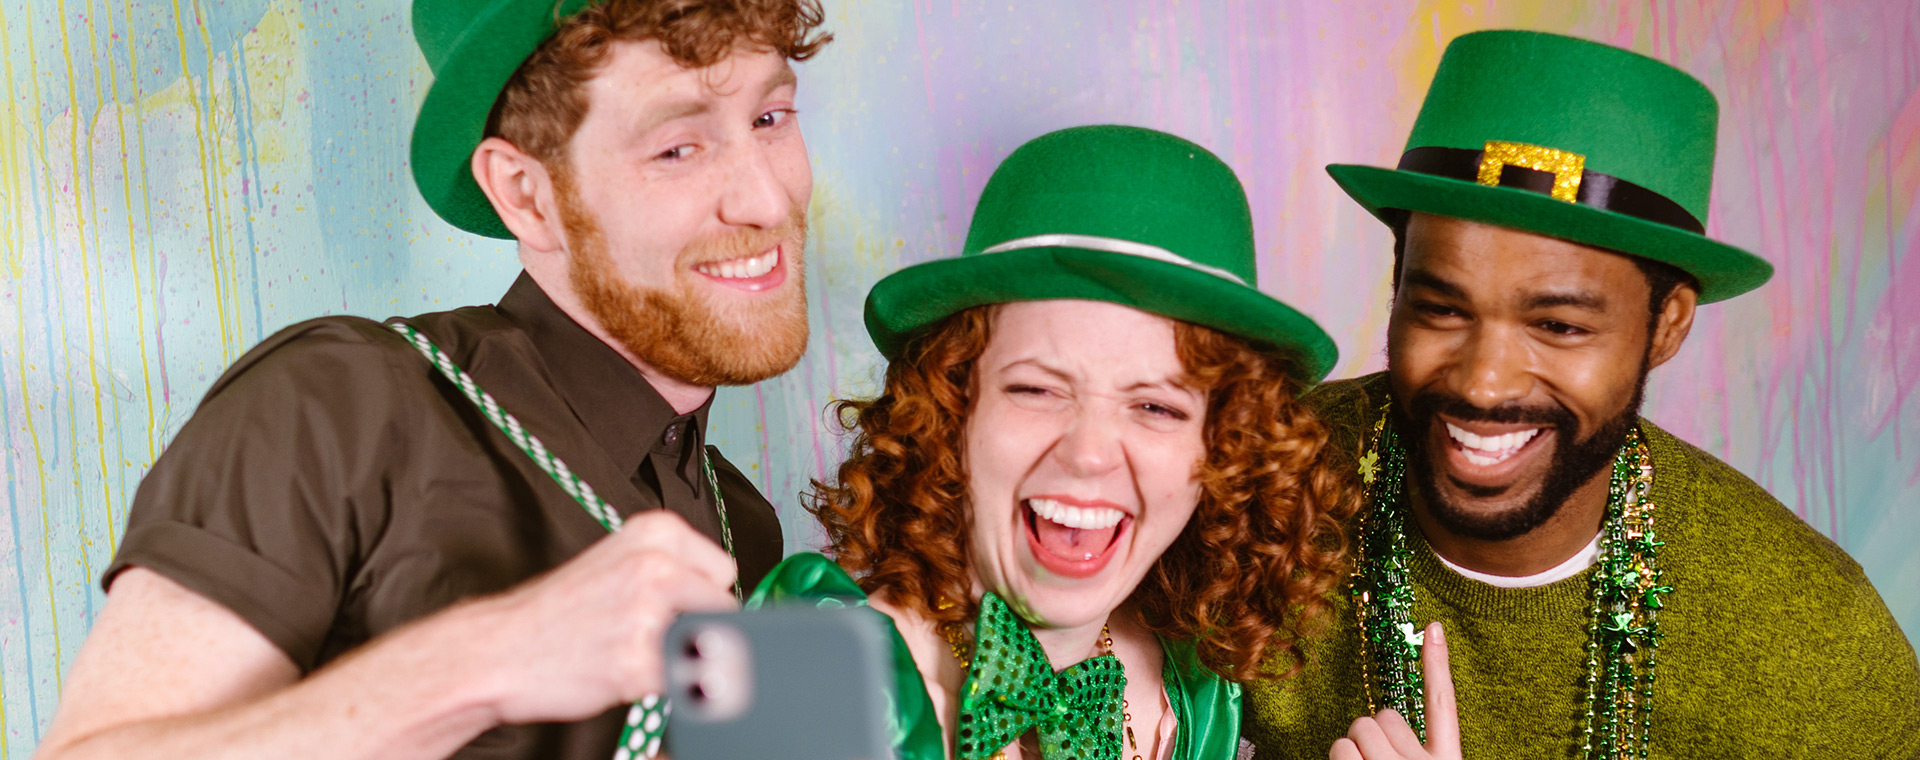 How to say ‘Happy St. Patrick’s Day’ in Irish